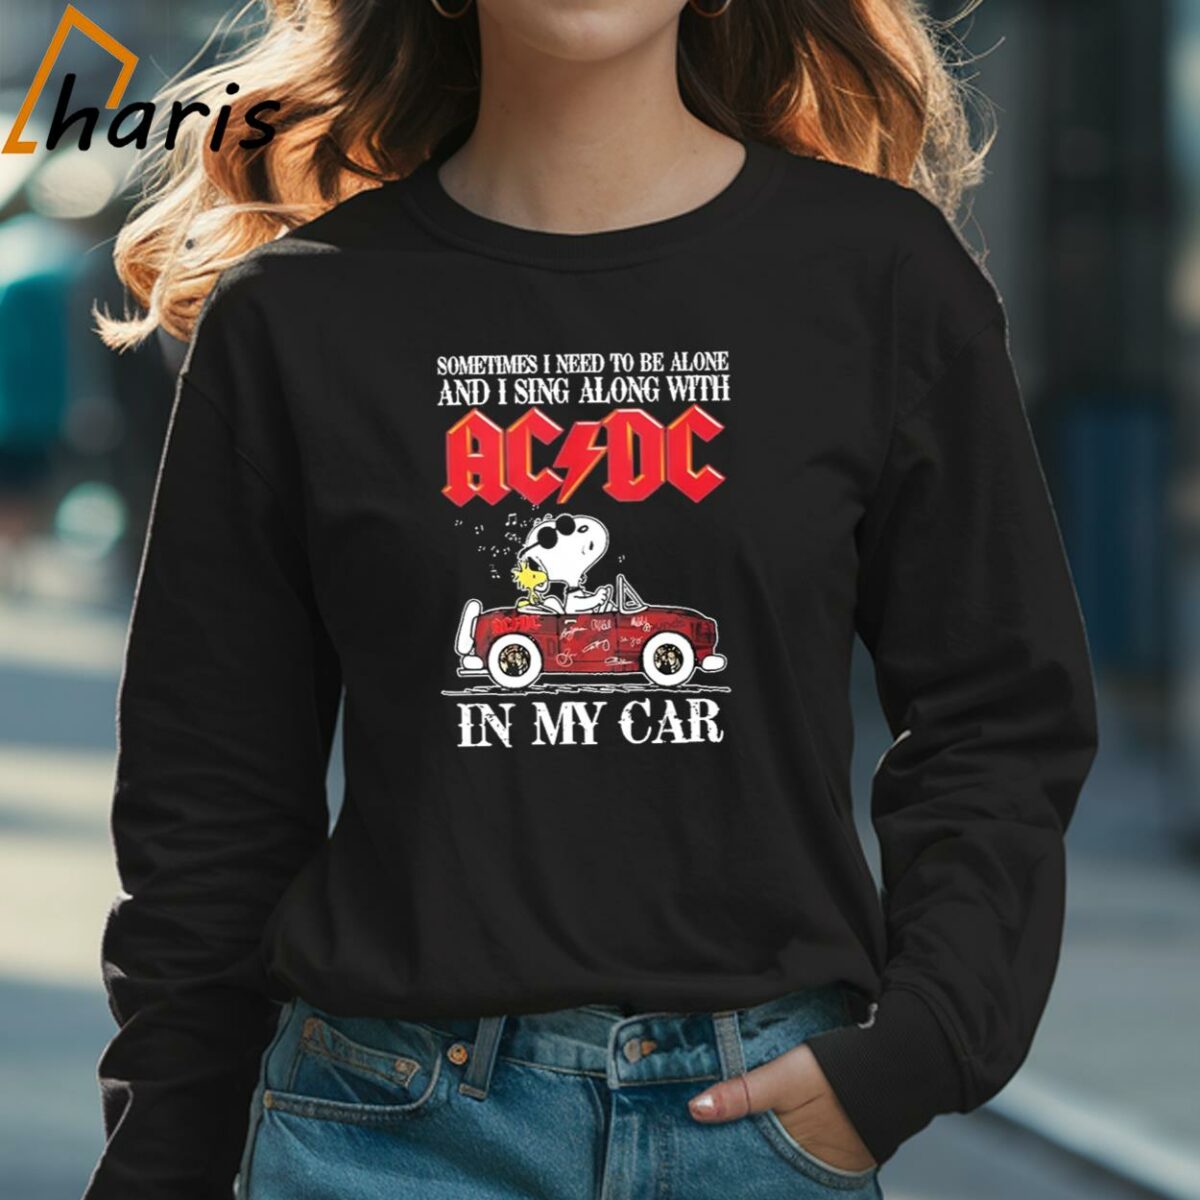 ACDC Sometimes I Need To Be Alone And Sing Along In My Car T Shirt 3 Long sleeve shirt